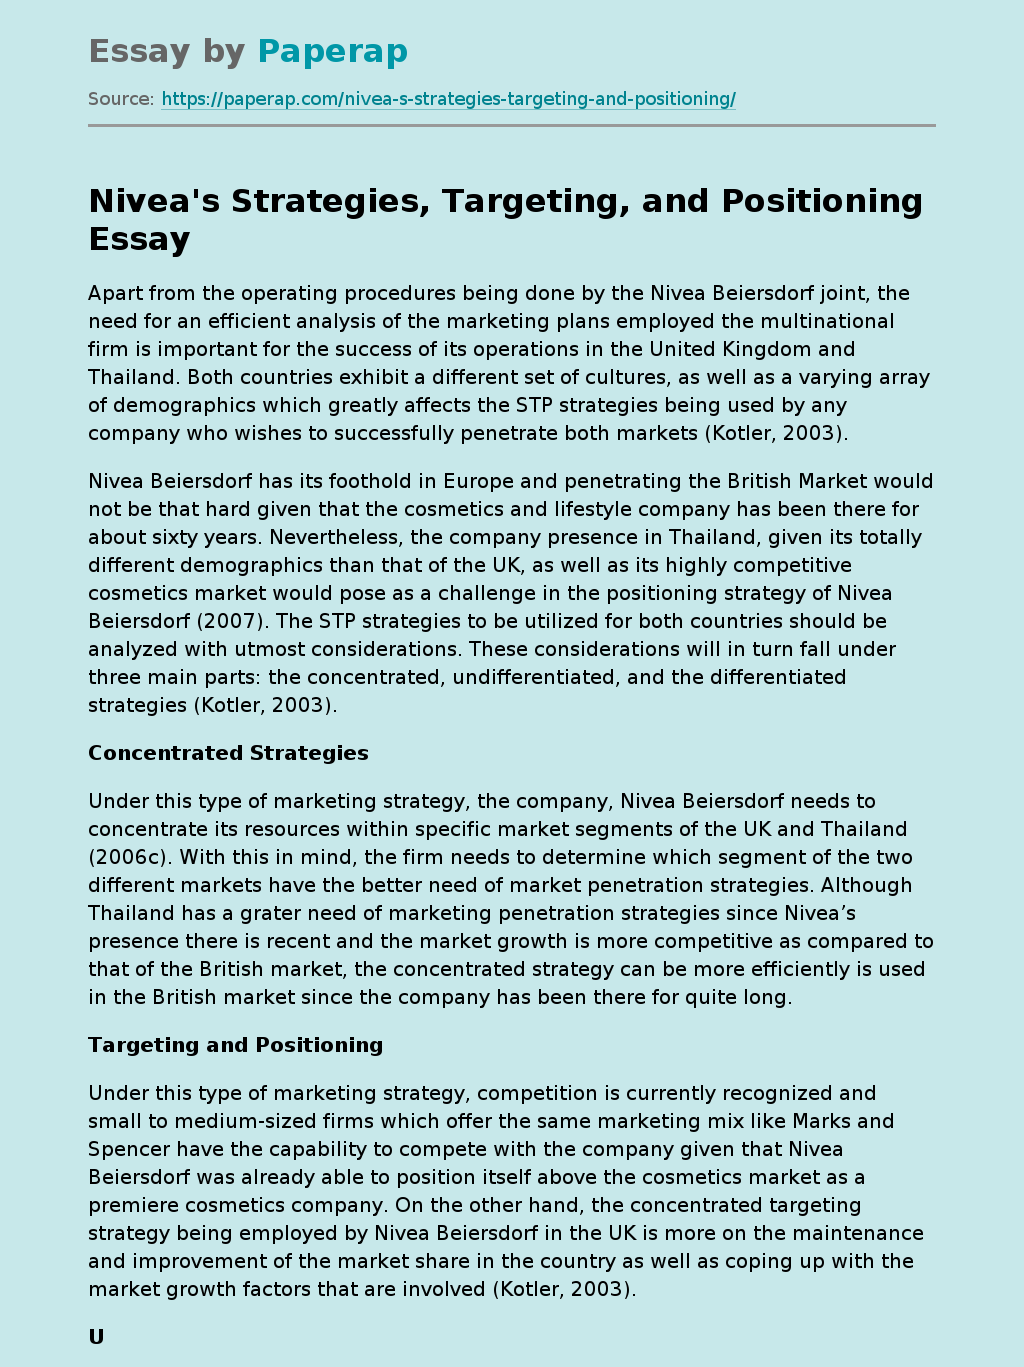 Nivea's Strategies, Targeting, and Positioning